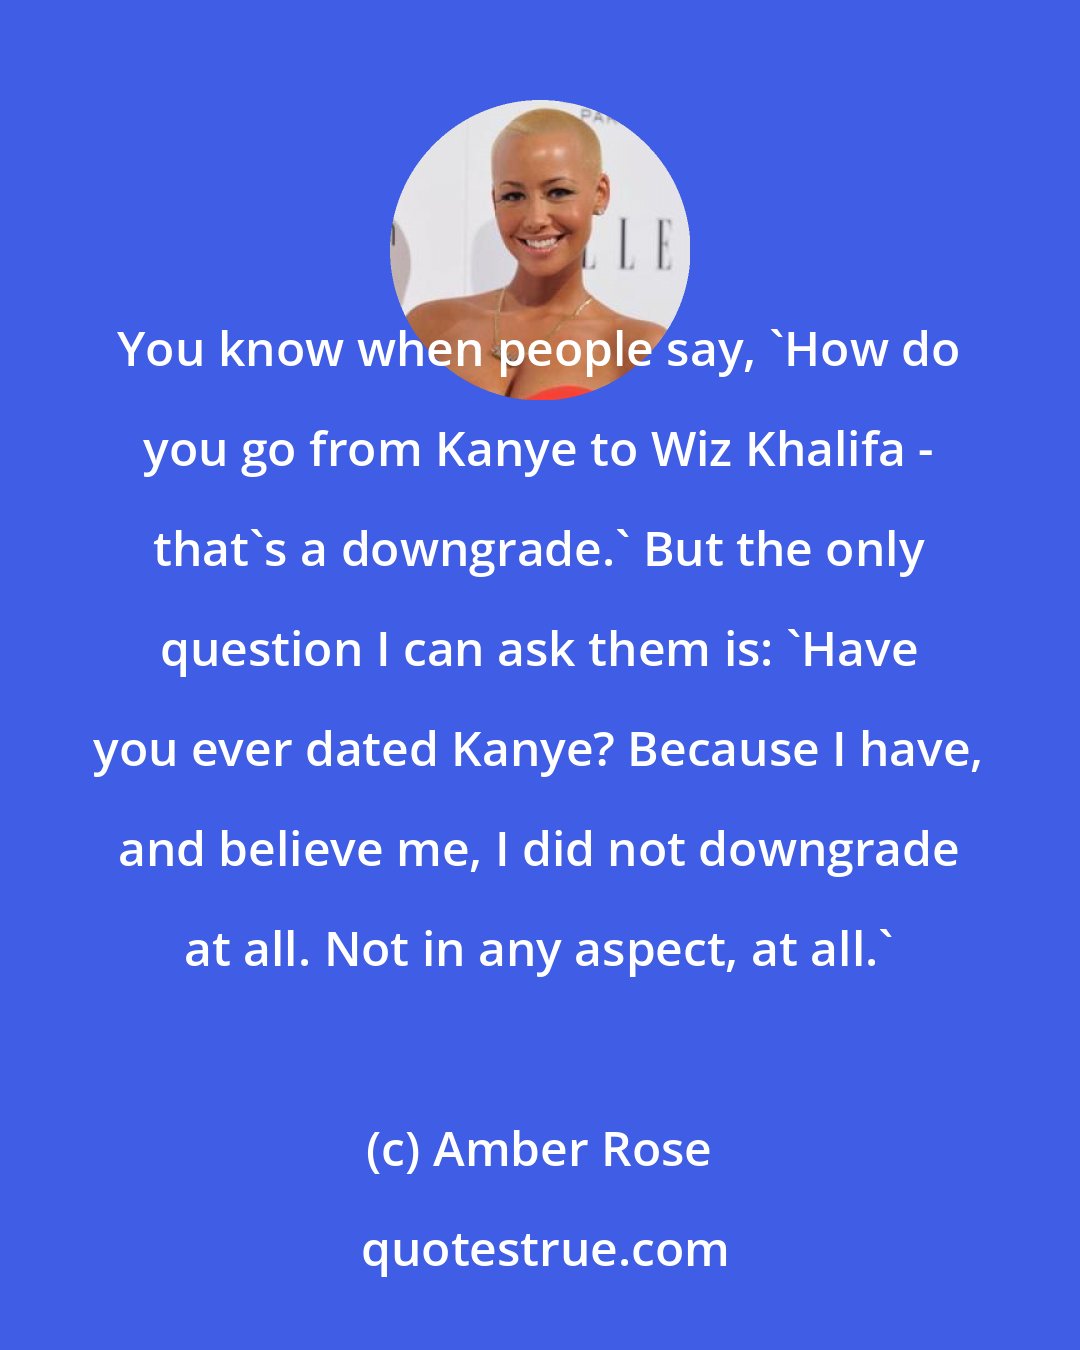 Amber Rose: You know when people say, 'How do you go from Kanye to Wiz Khalifa - that's a downgrade.' But the only question I can ask them is: 'Have you ever dated Kanye? Because I have, and believe me, I did not downgrade at all. Not in any aspect, at all.'